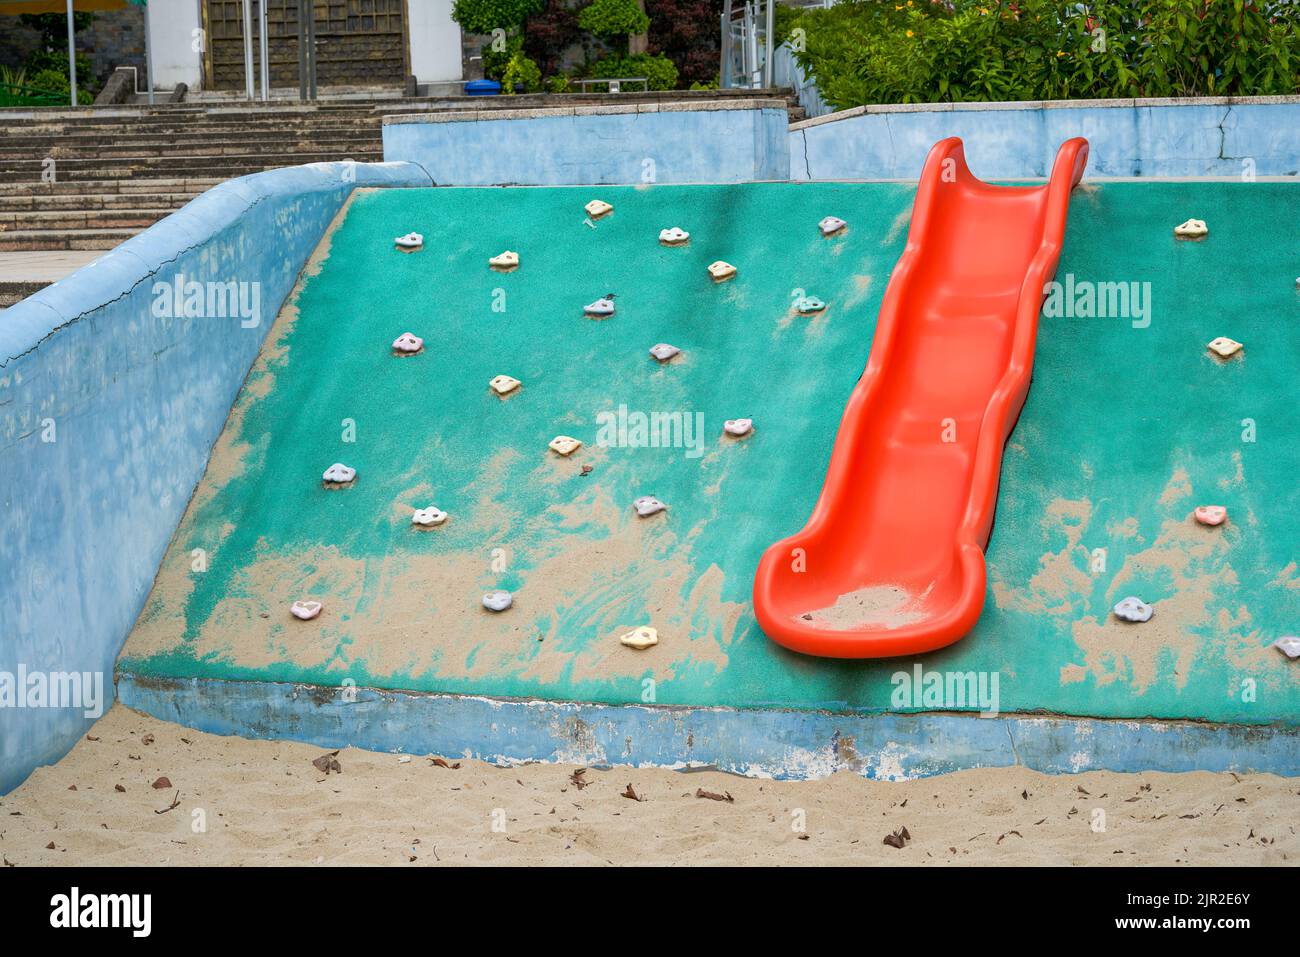 Play sand pool and slides in children's playground Stock Photo